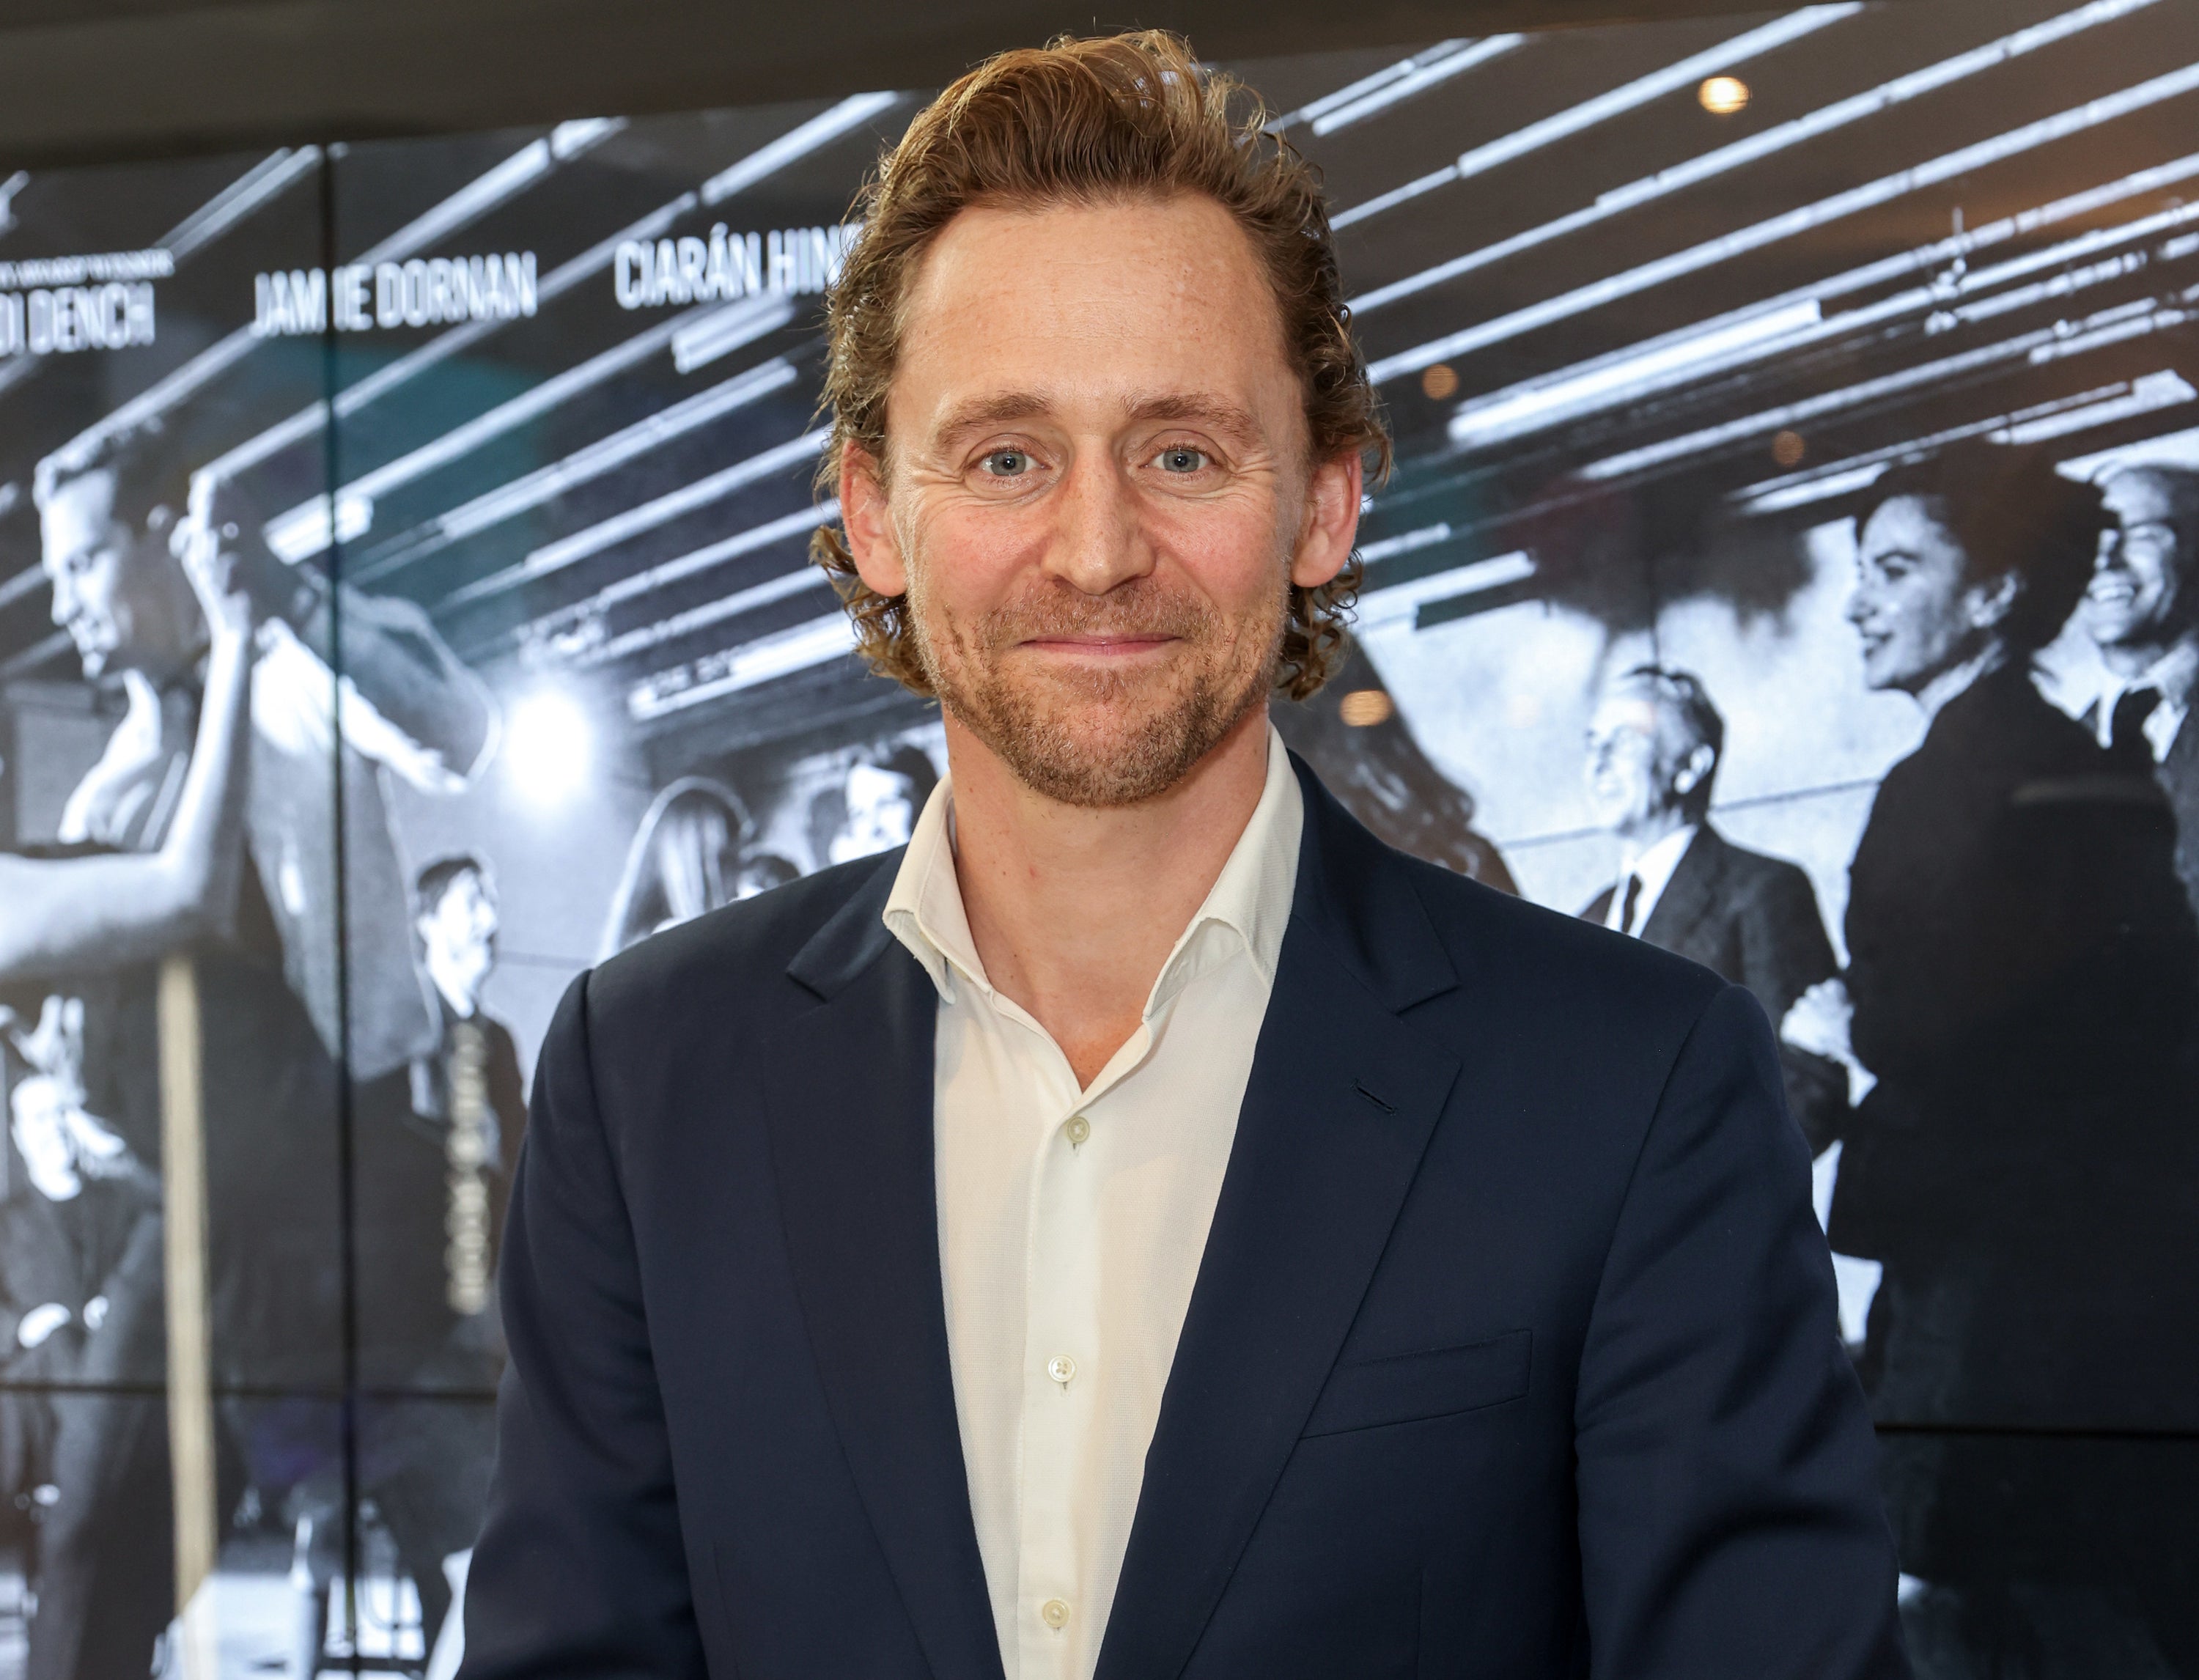 A close-up of Tom smiling and wearing a jacket and shirt, no tie